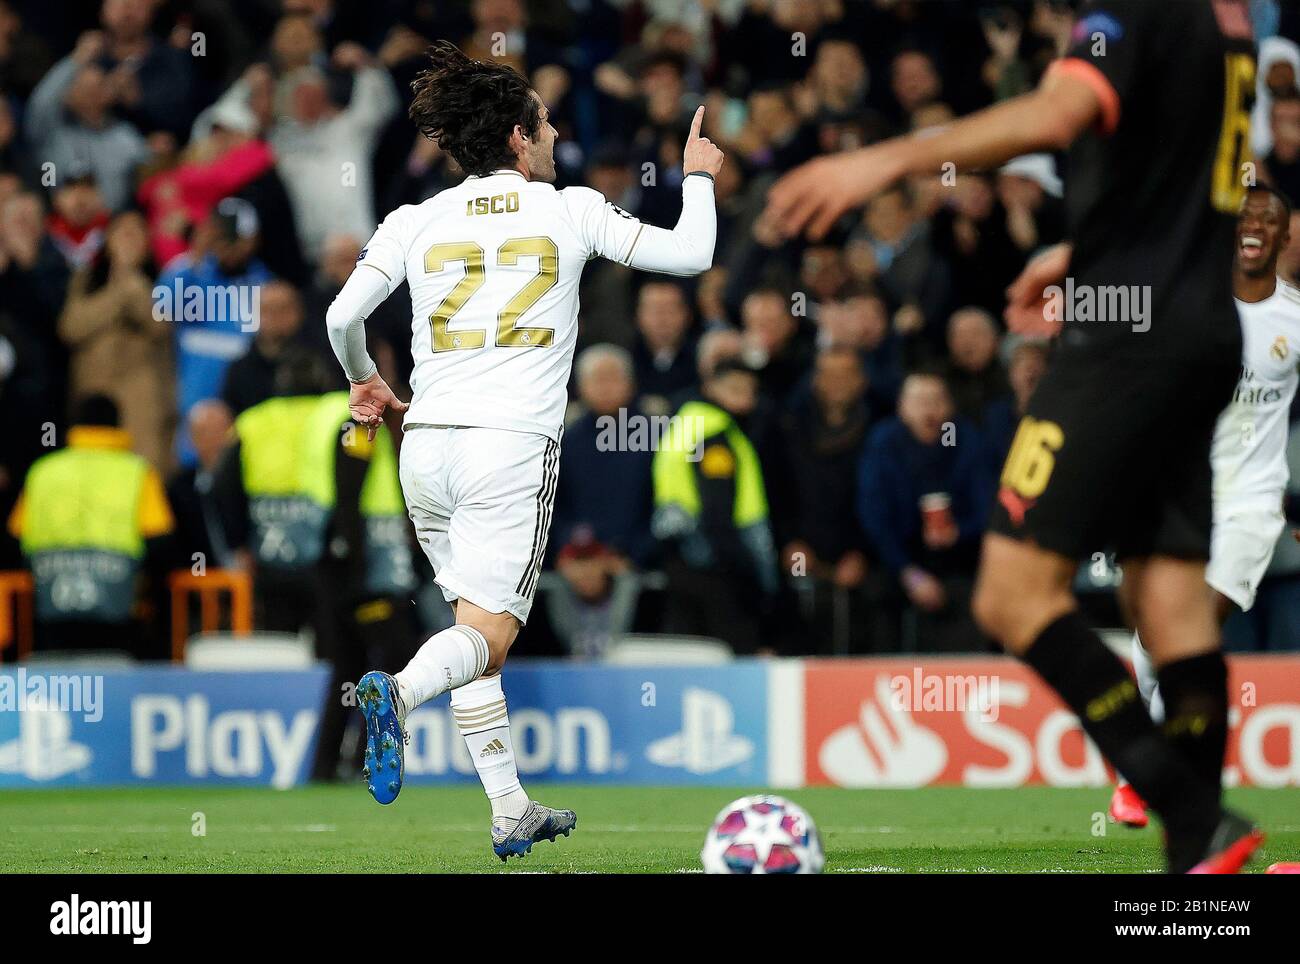 Real Madrid CF's Isco Alarcon celebrates after scoring a goal during the UEFA Champions League match, round of 16 first leg between Real Madrid and Manchester City at Santiago Bernabeu Stadium.(Final score: Real Madrid 1-2 Manchester City) Stock Photo